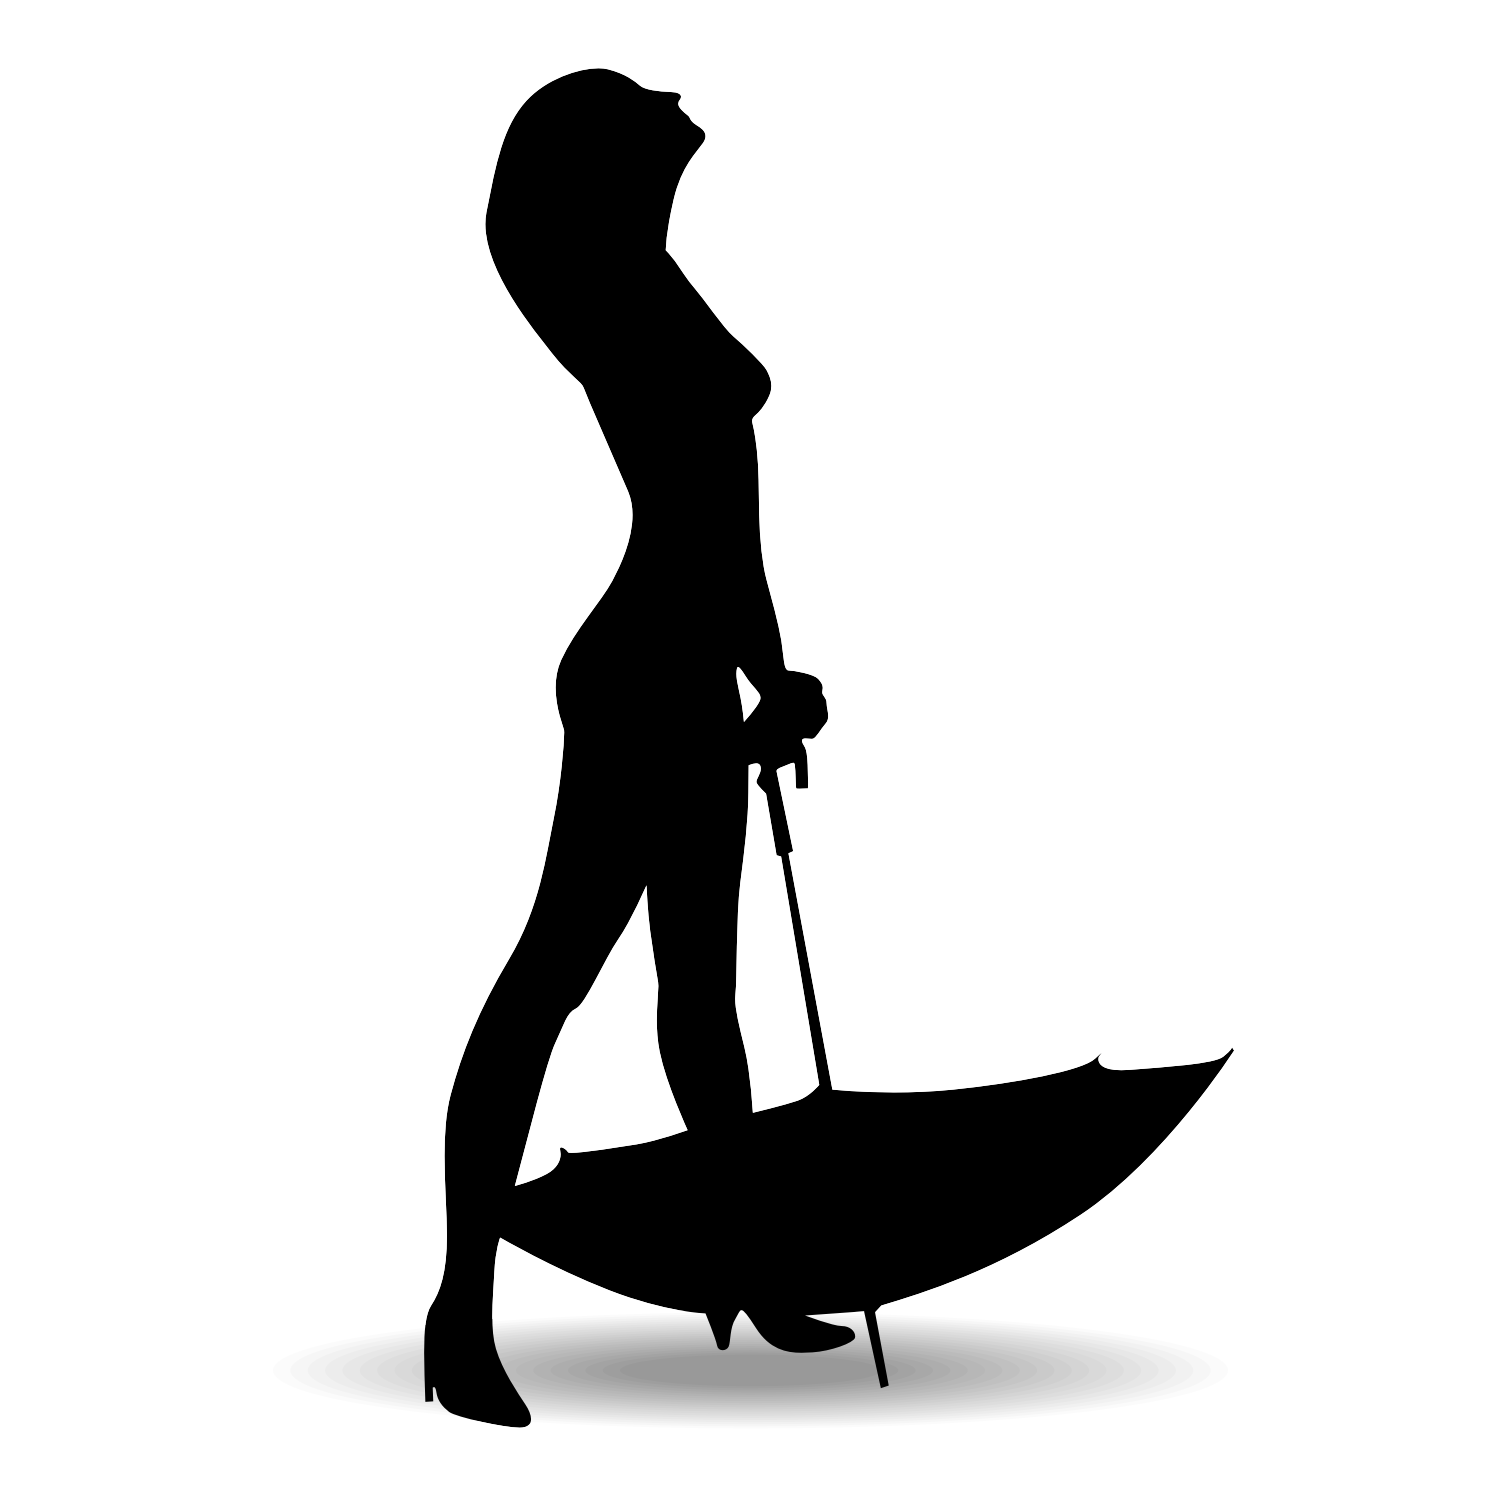 Download Vector for free use: Woman silhouette with umbrella